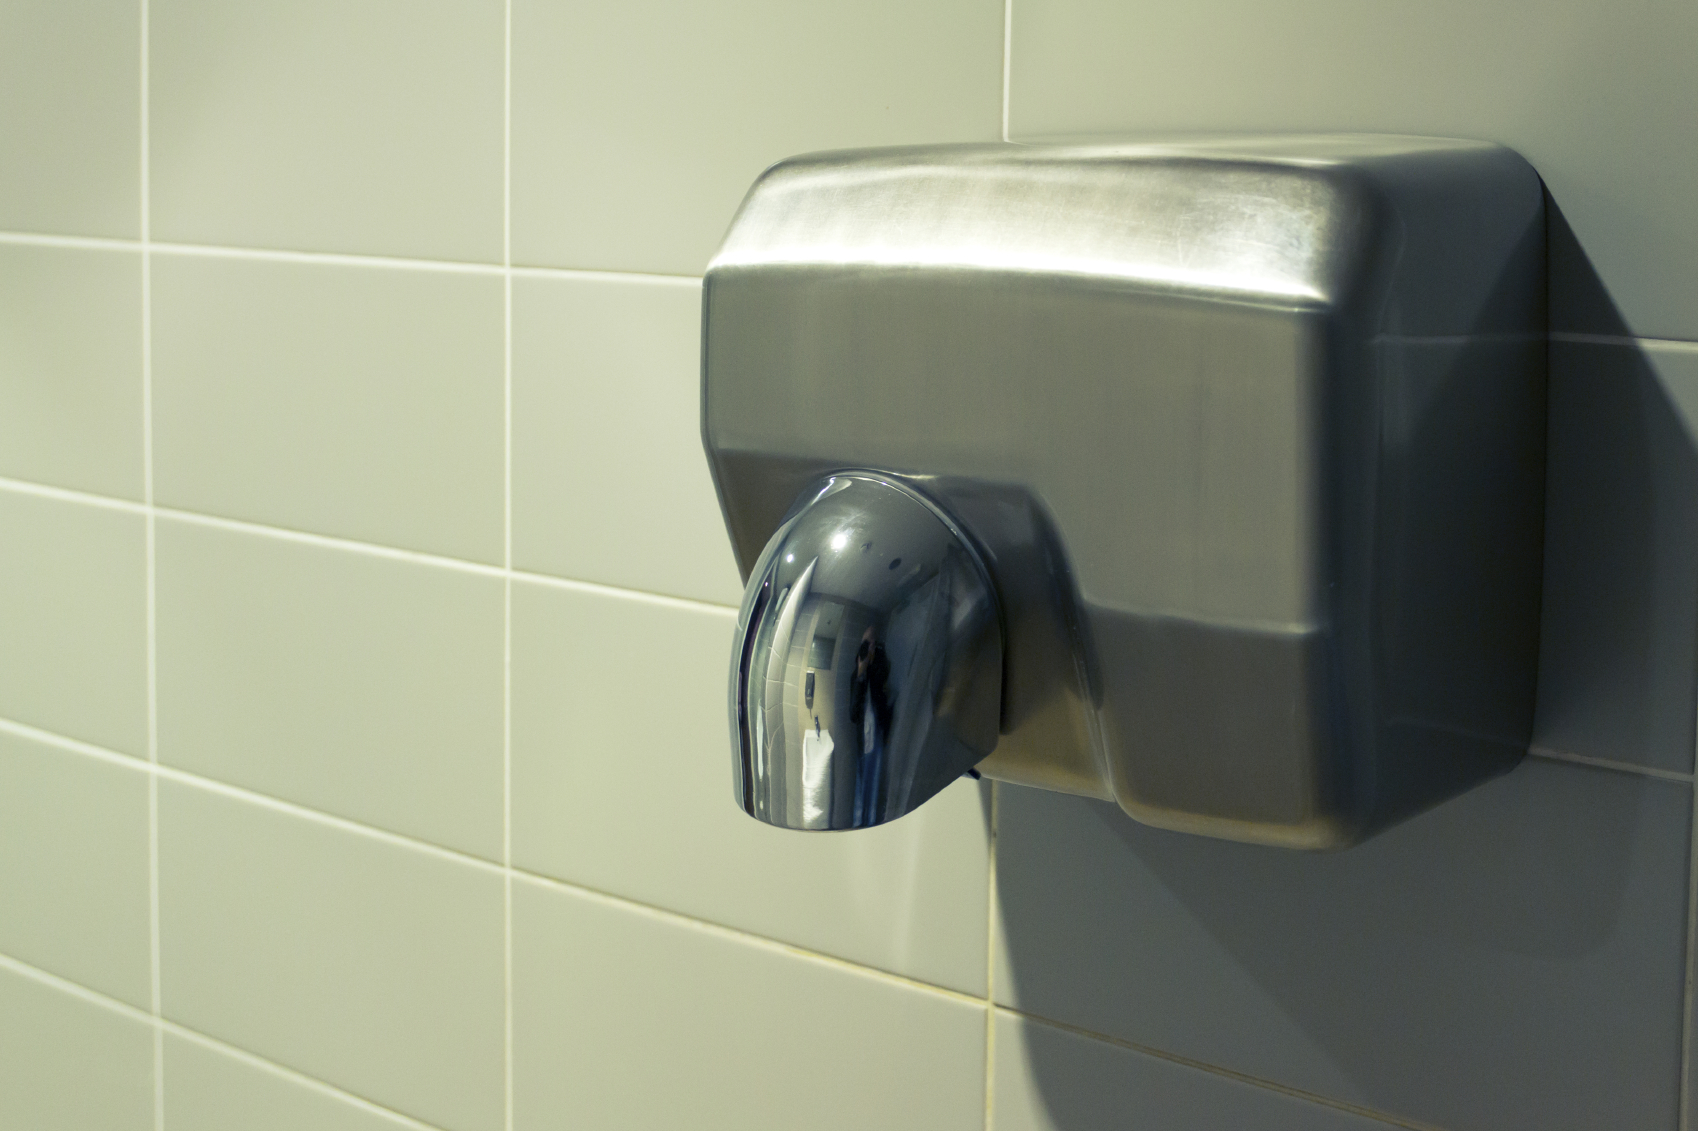 Stay away from the new high-speed jet air dryers in public bathrooms. A study shows they send germs flying.